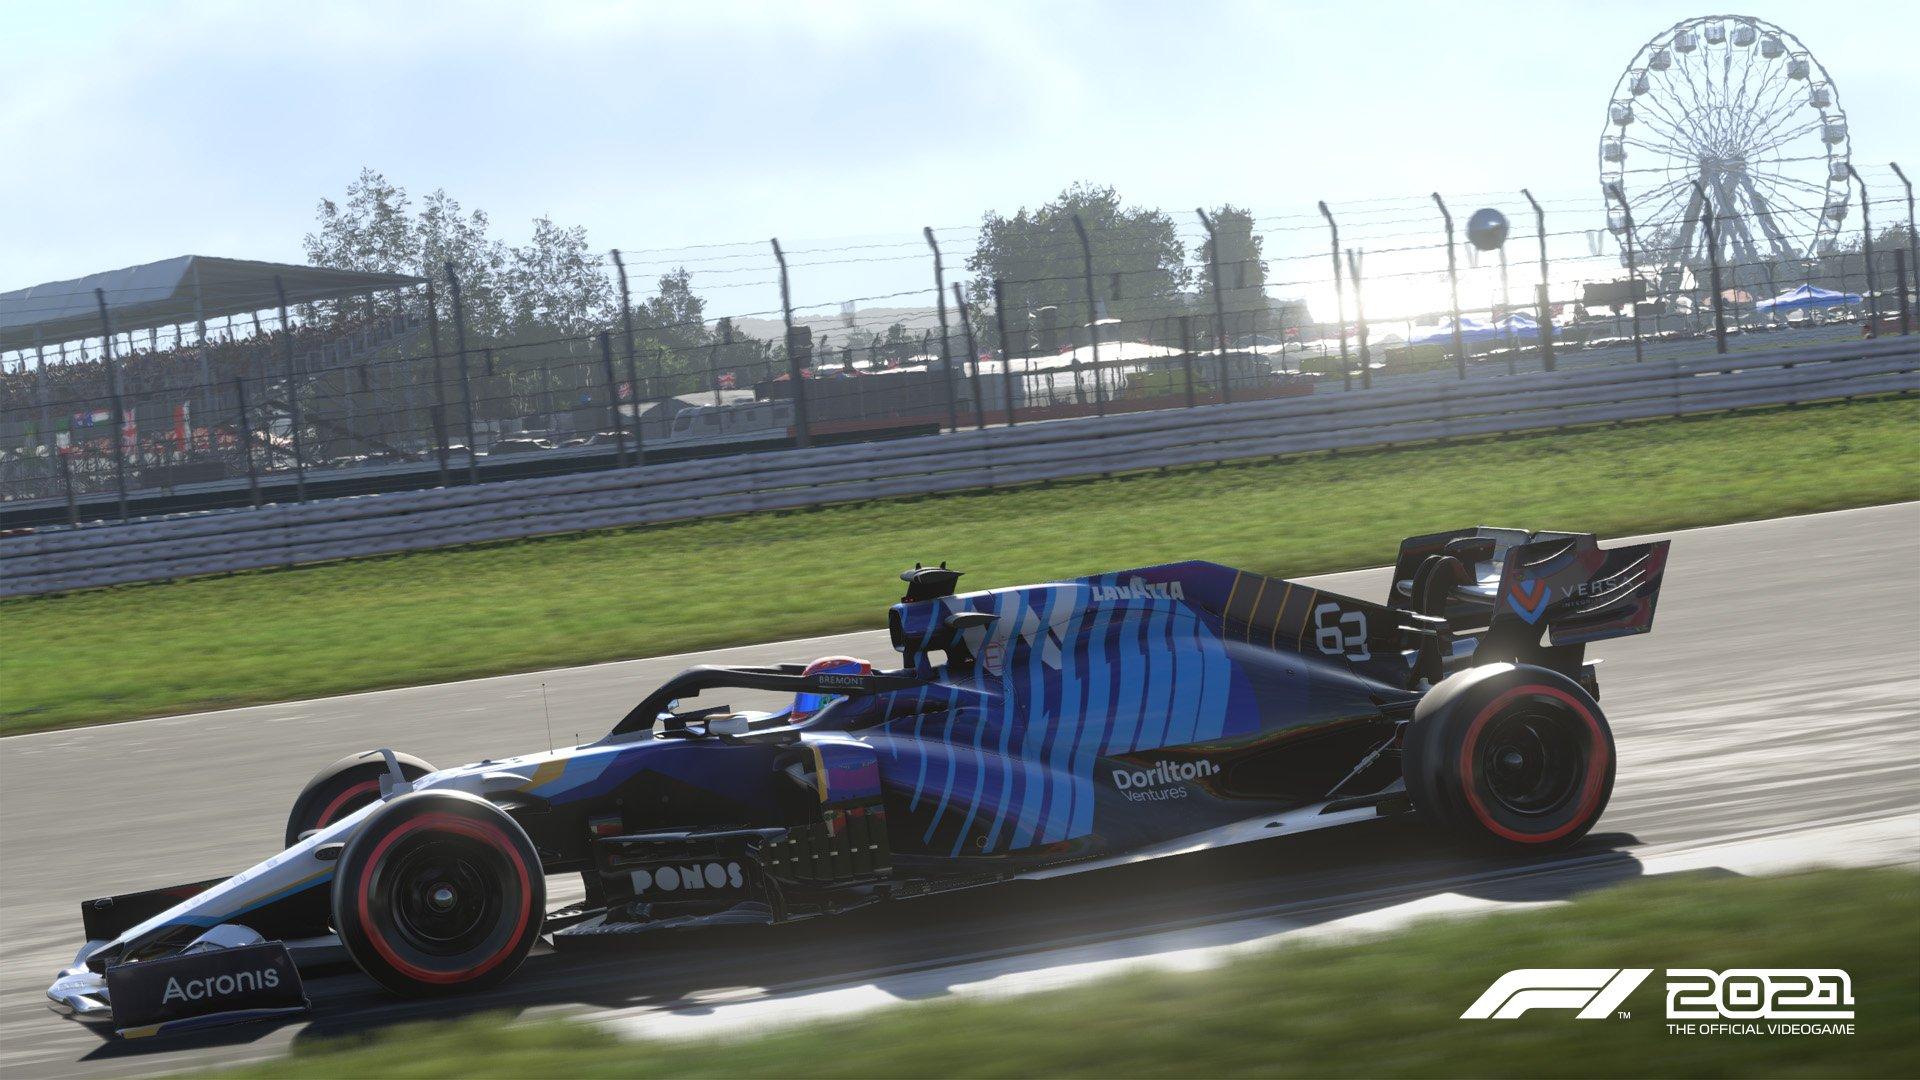 F1 22 now downloadable on PlayStation! : r/F1Game